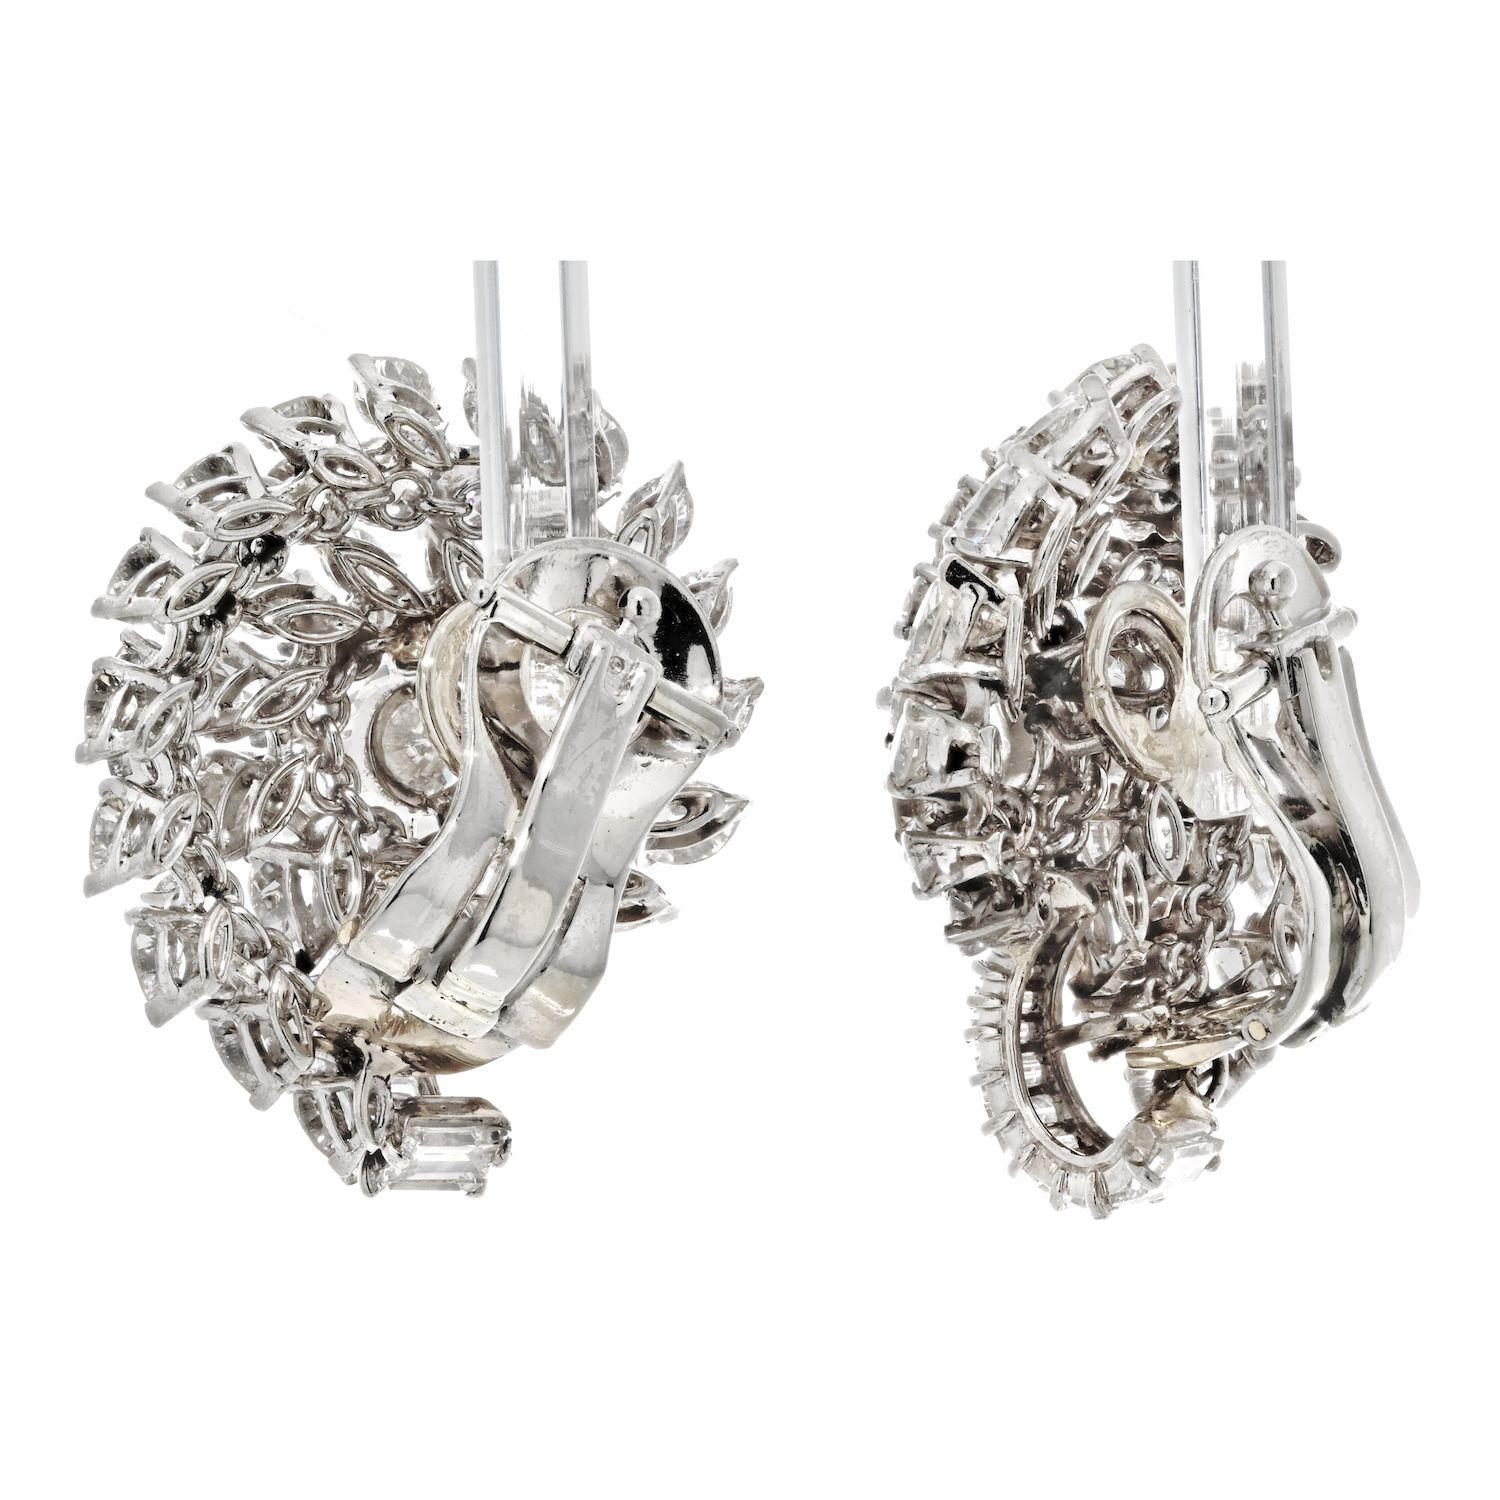 These gorgeous, glamorous and sexy earclips, each of radiating scroll design are made with Round cut Diamonds in the centre and Marquise shaped Diamonds along with small round cut diamonds in between. Altogether weighing 16.00cttw. 
Mounted in